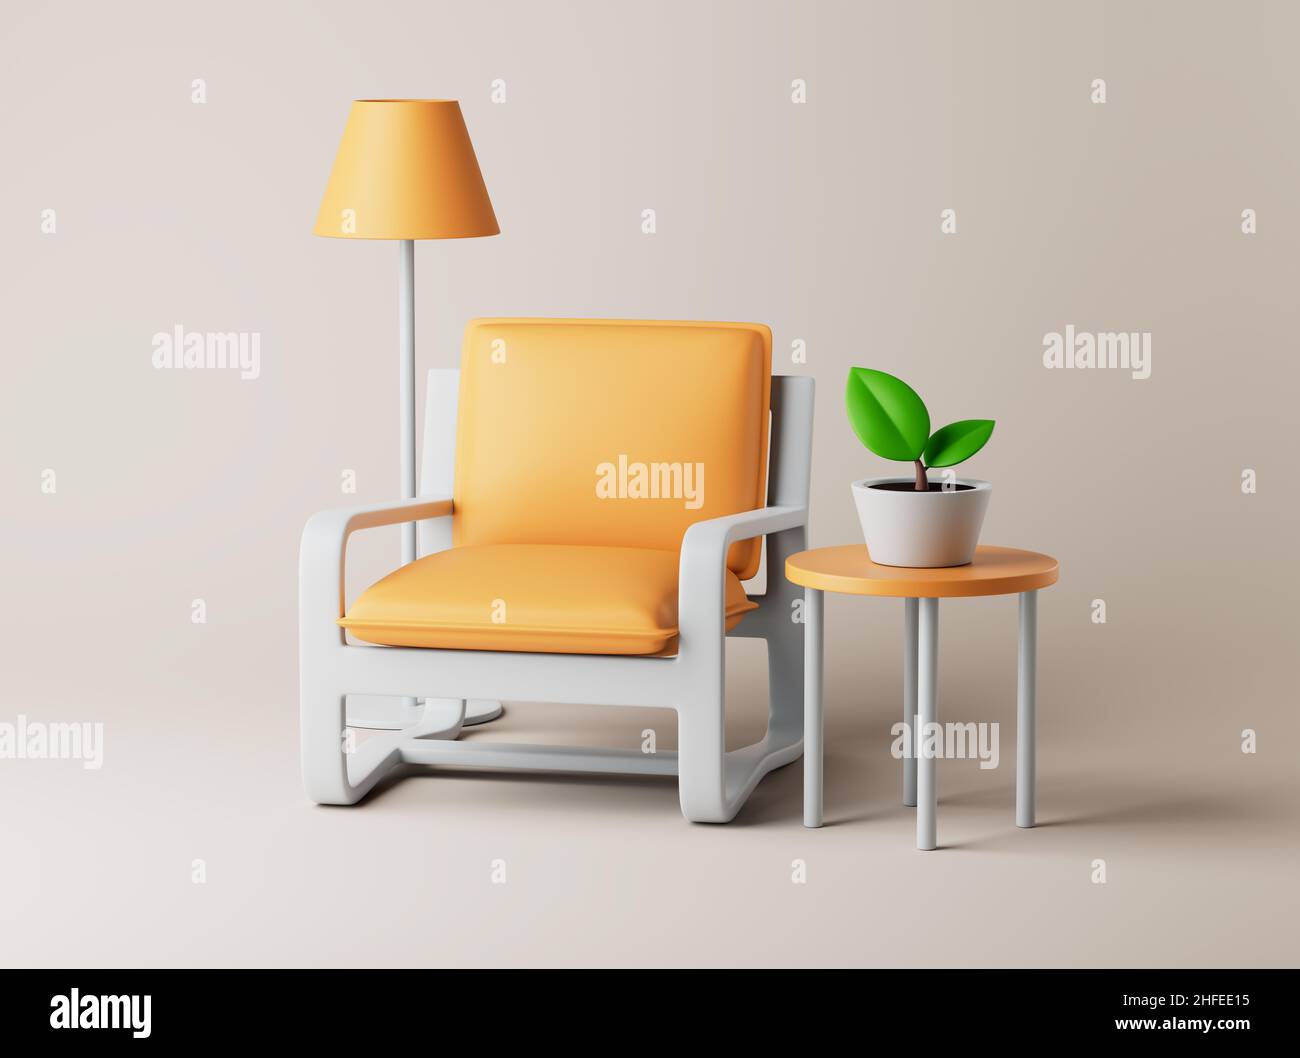 Interior with armchair, floor lamp, small table and plant on floor. Simple 3d render illustration. Isolated objects on pastel background Stock Photo